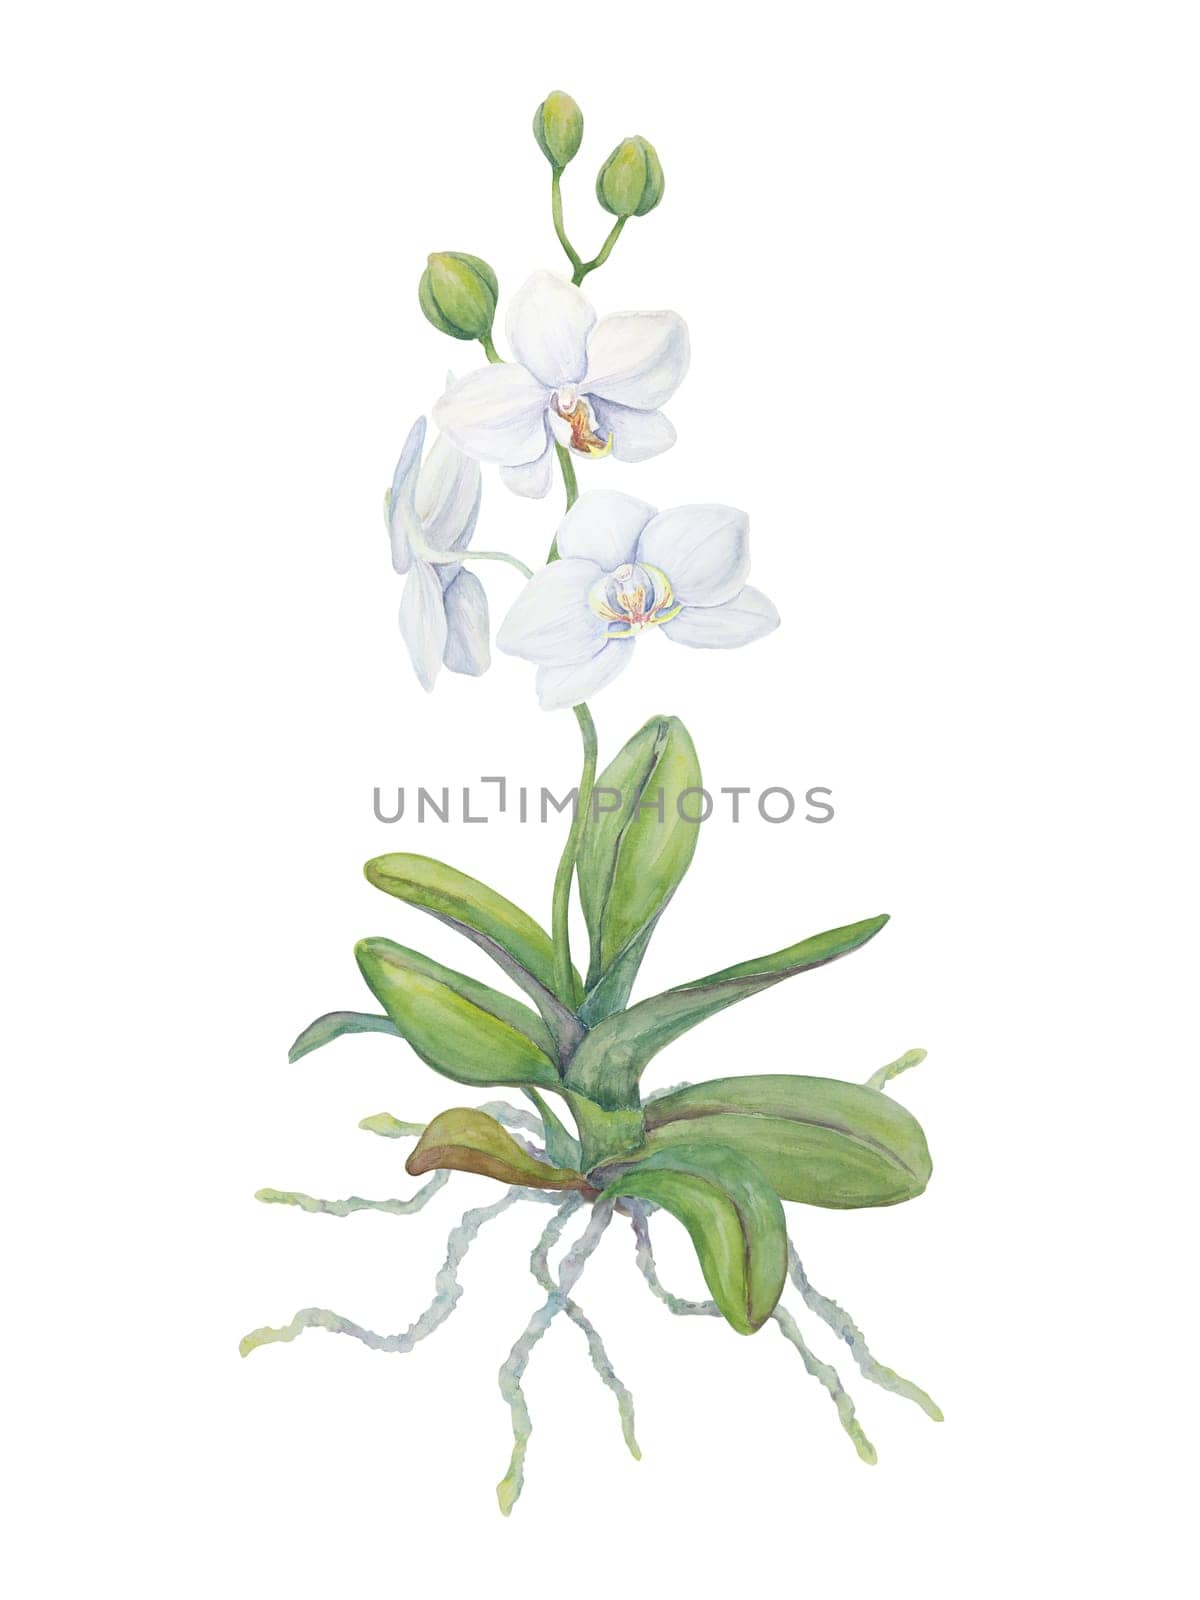 White orchid flower with roots. Delicate realistic botanical watercolor hand drawn illustration. Clipart for wedding invitations, decor, textiles, gifts, packaging and floristry. by florainlove_art